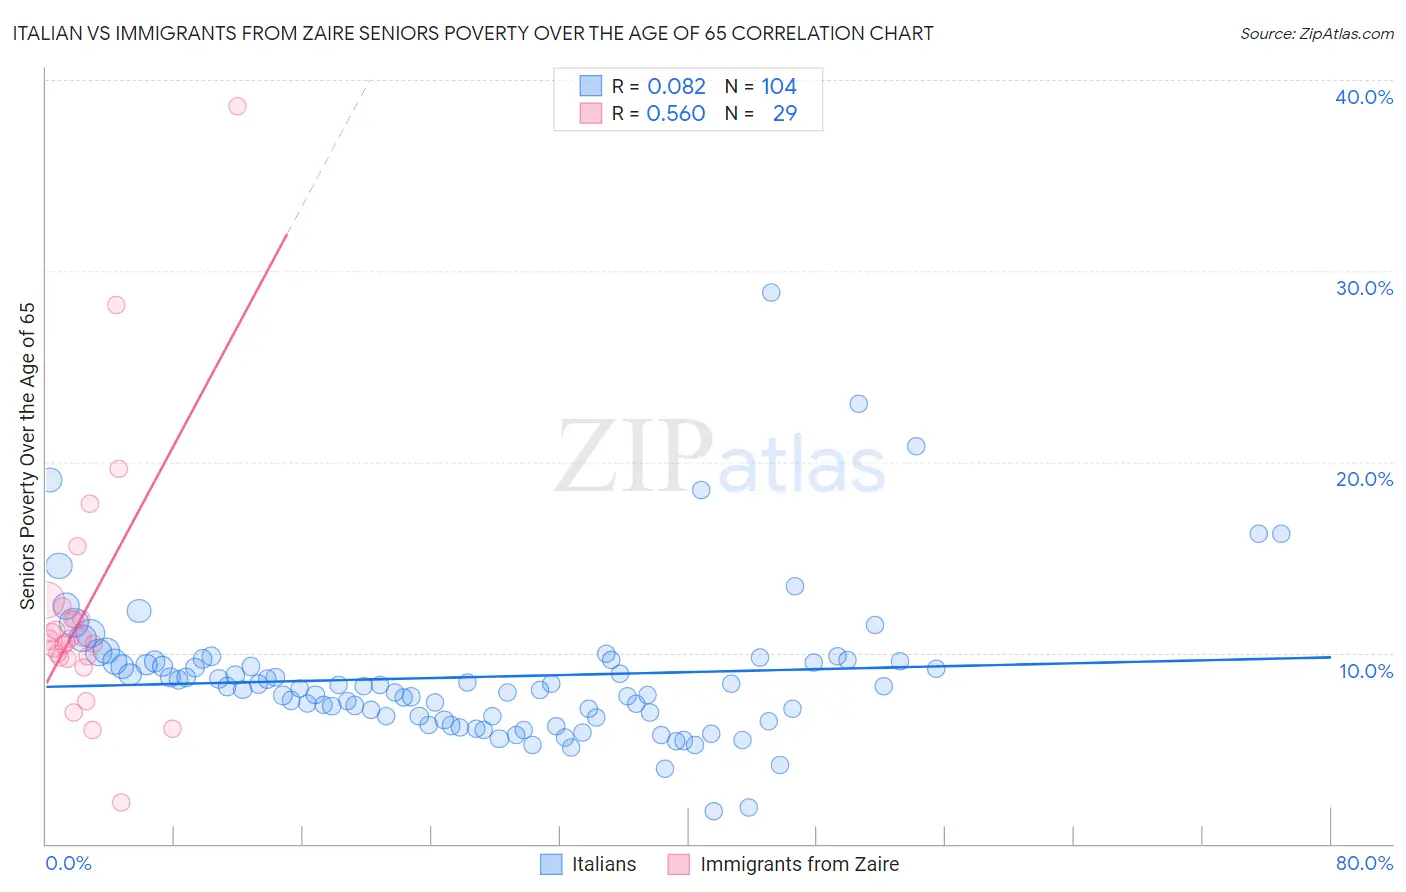 Italian vs Immigrants from Zaire Seniors Poverty Over the Age of 65